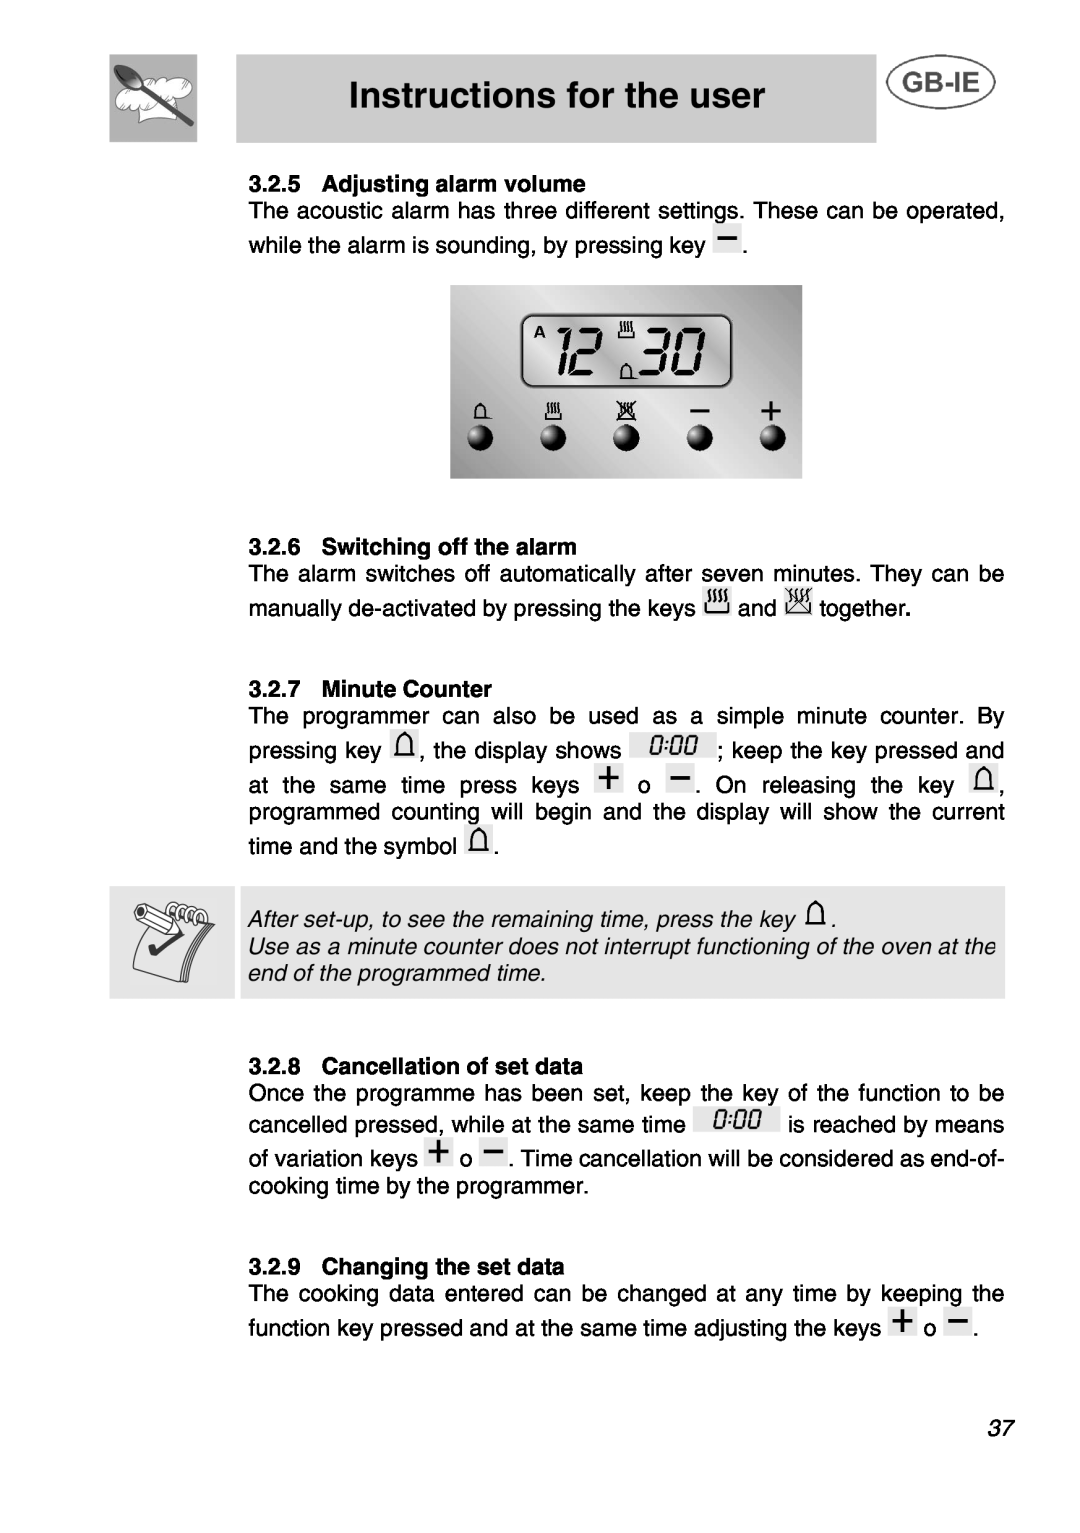 Smeg A1C Instructions for the user, Adjusting alarm volume, Switching off the alarm, Minute Counter, Changing the set data 